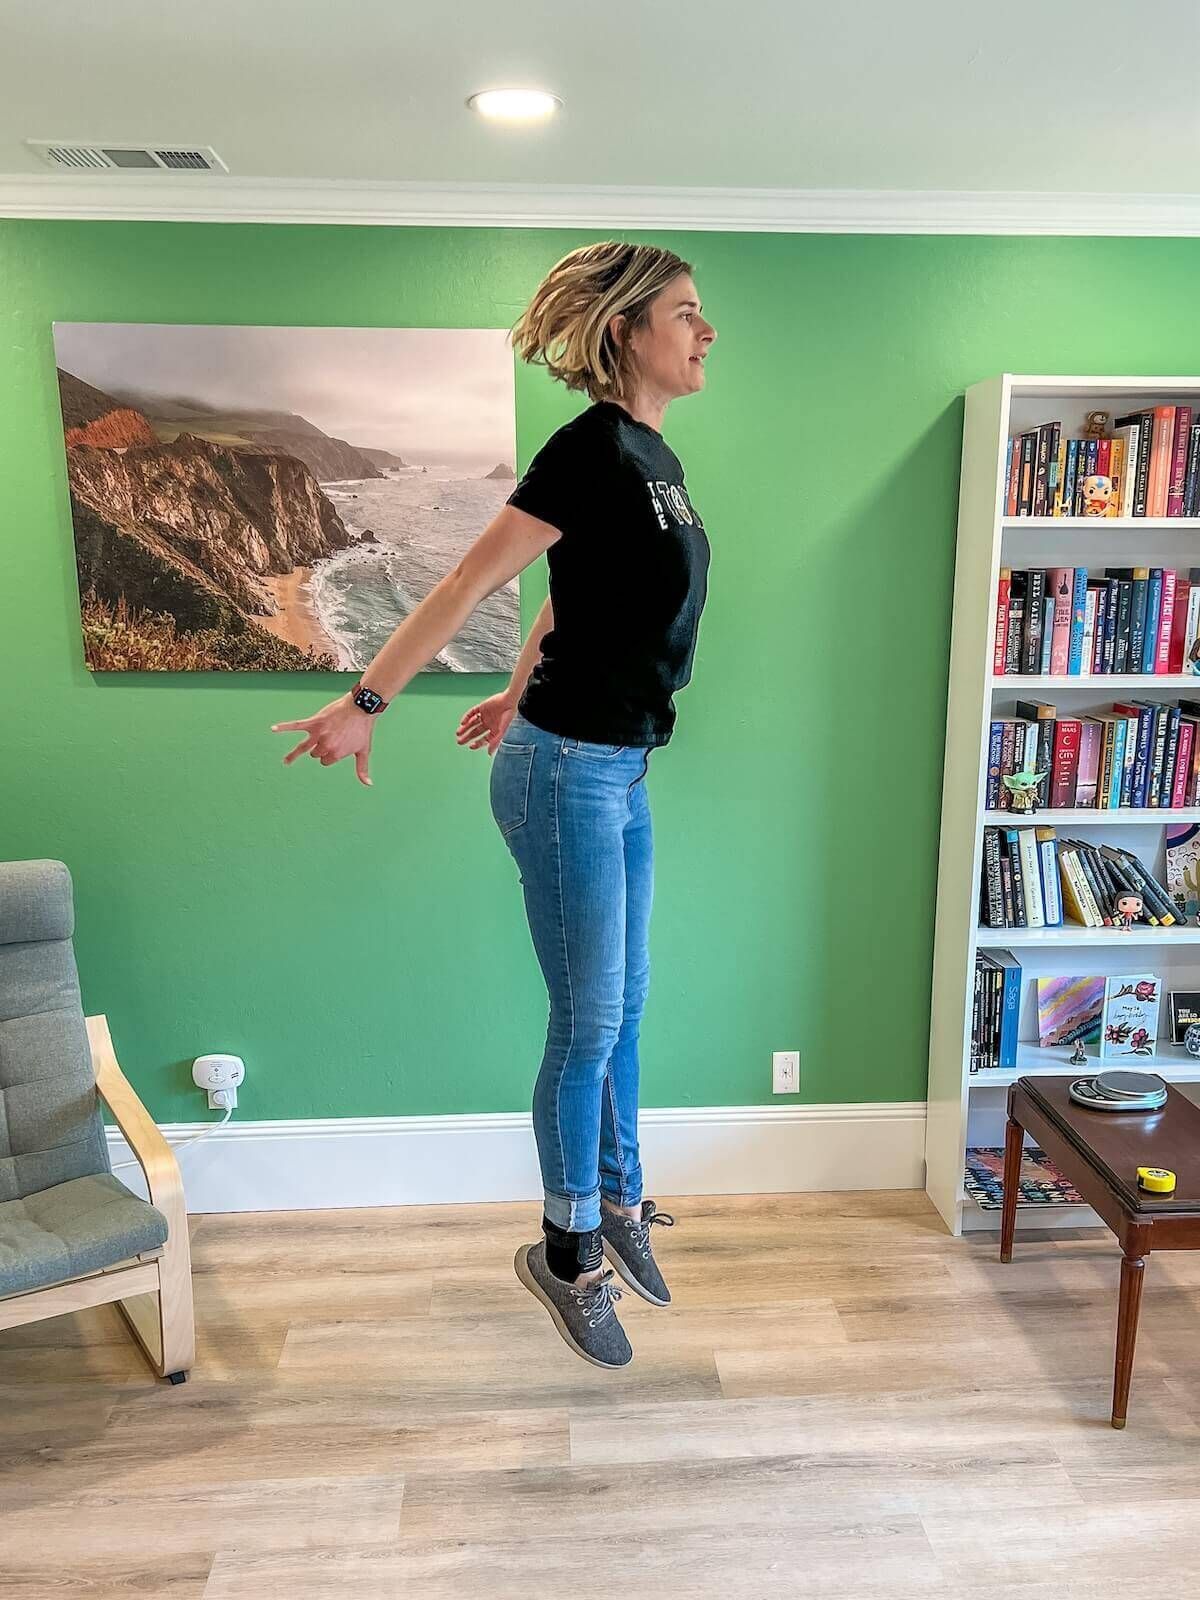 A light-haired young woman wearing jeans, a black t-shirt, and grey sneakers caught mid-jump in an interior with a green wall behind her.